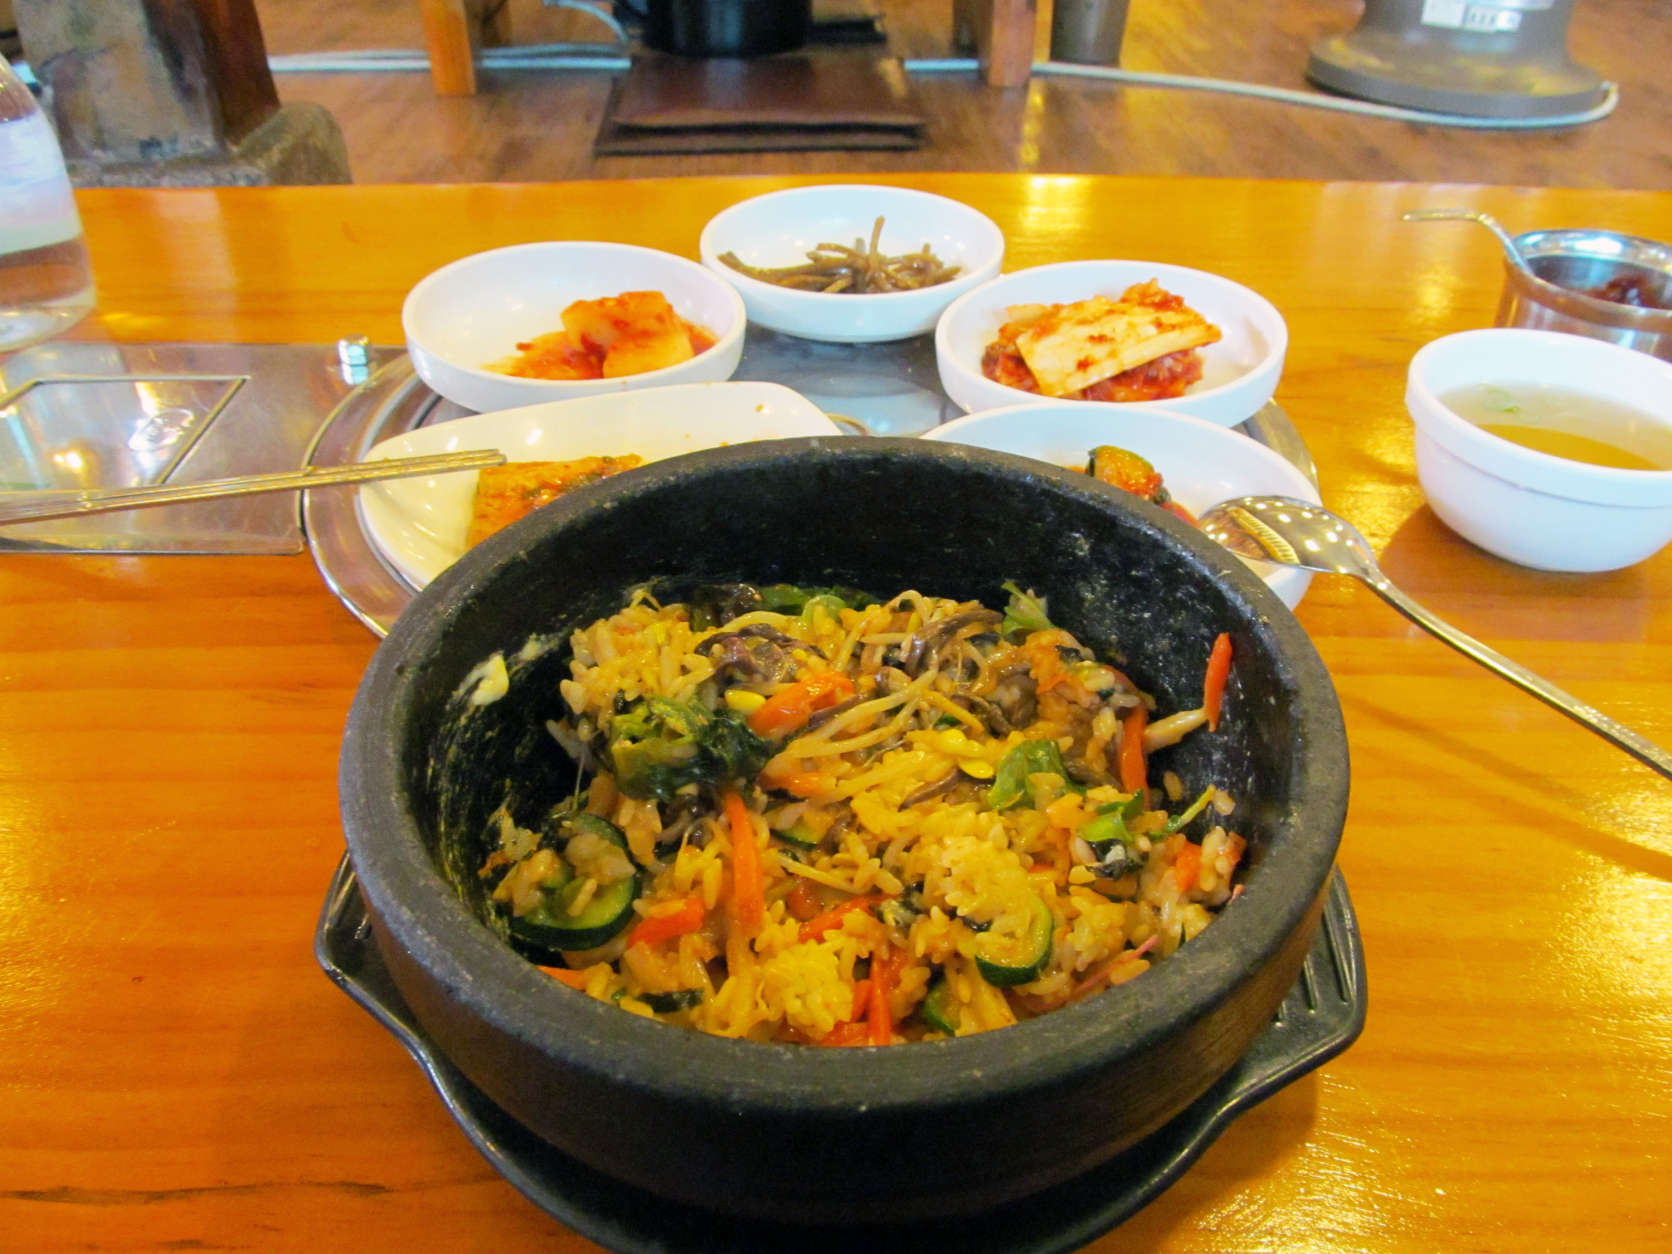 This February 2014 photo shows a traditional Korean dinner of bibimbap, a dish made of rice, sliced beef, vegetables and chilies, accompanied by several smaller plates of pickles and kimchi in Seoul, Korea. Seouls hyper-efficient capital draws visitors with its exquisite restaurants, historic palaces and ultramodern infrastructure. (AP Photo/Amir Bibawy).